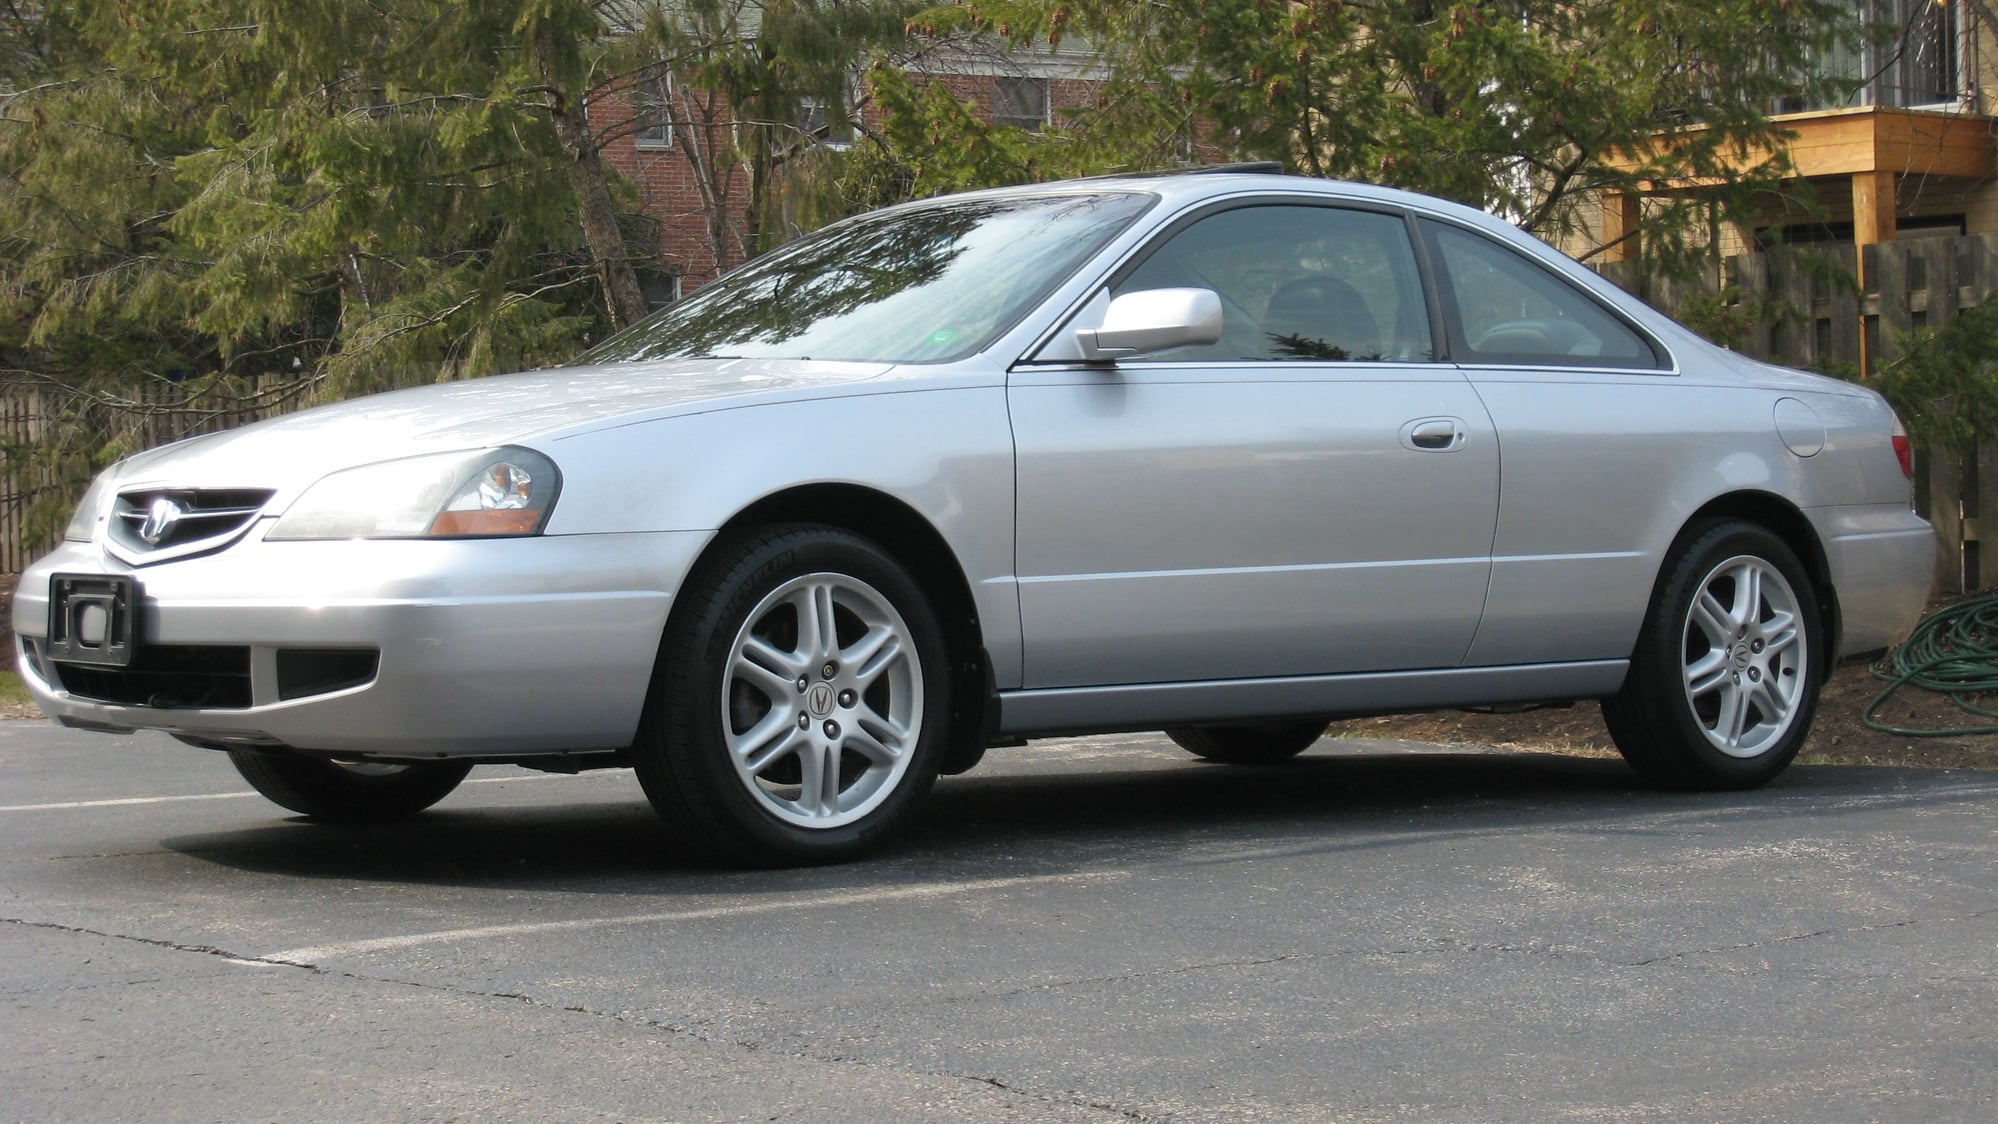 2003 Acura CL - EXPIRED: Pristine Acura 3.2 CL Type-S 6-speed w/Navi - Used - VIN 19UYA41733A007771 - 133,000 Miles - 6 cyl - 2WD - Manual - Coupe - Silver - Chicago, IL 60026, United States